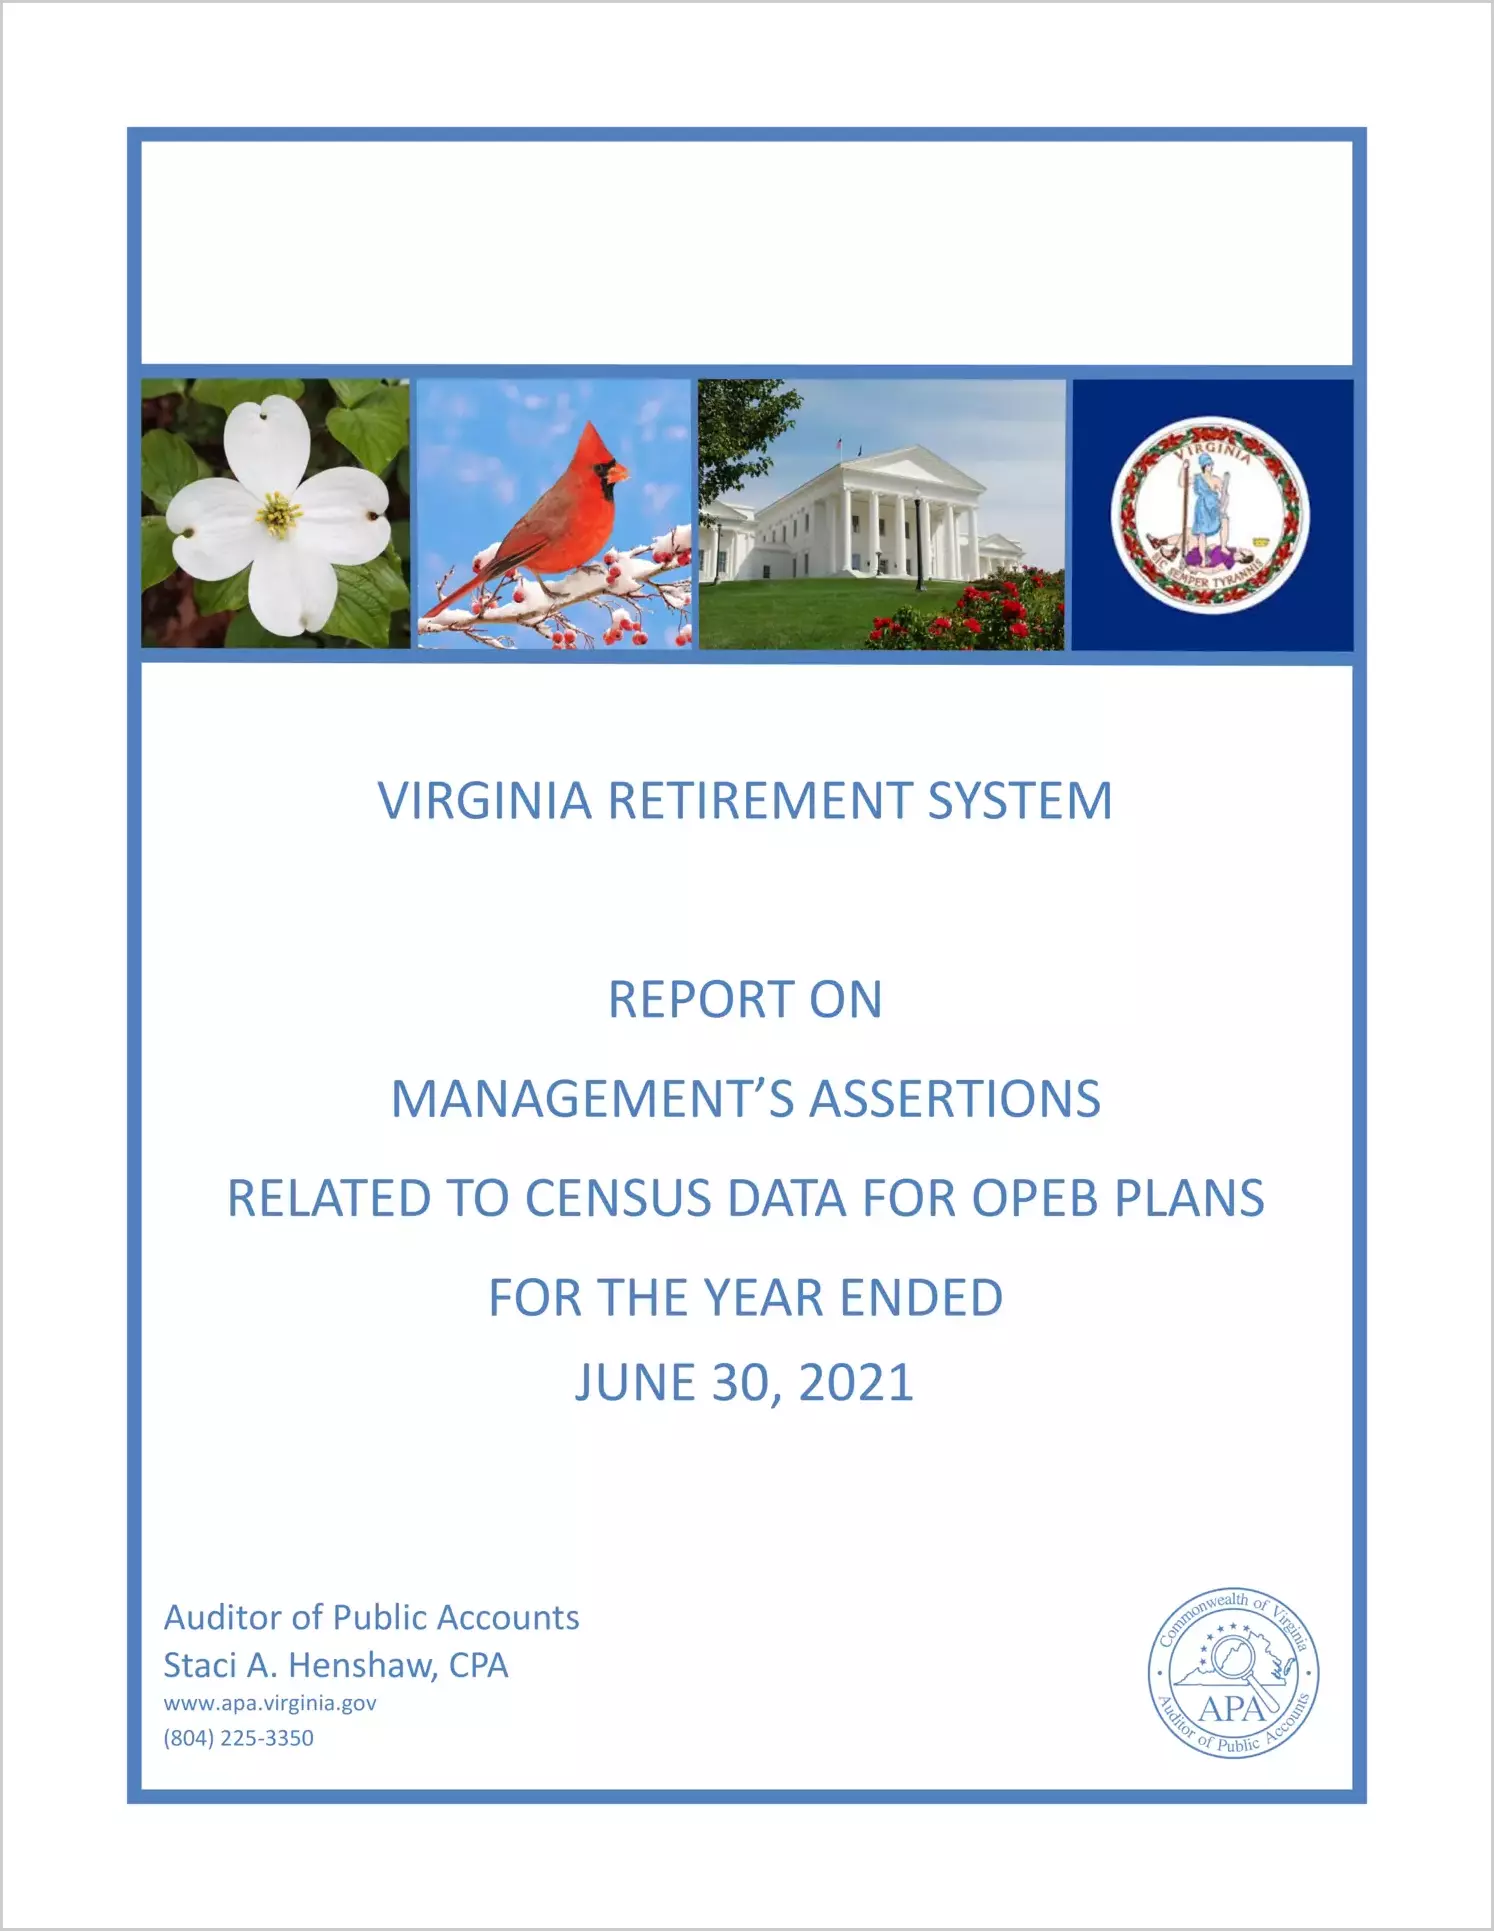 Virginia Retirement System Management's Assertions Related to Census Data for OPEB Plans for the year ended June 30, 2021